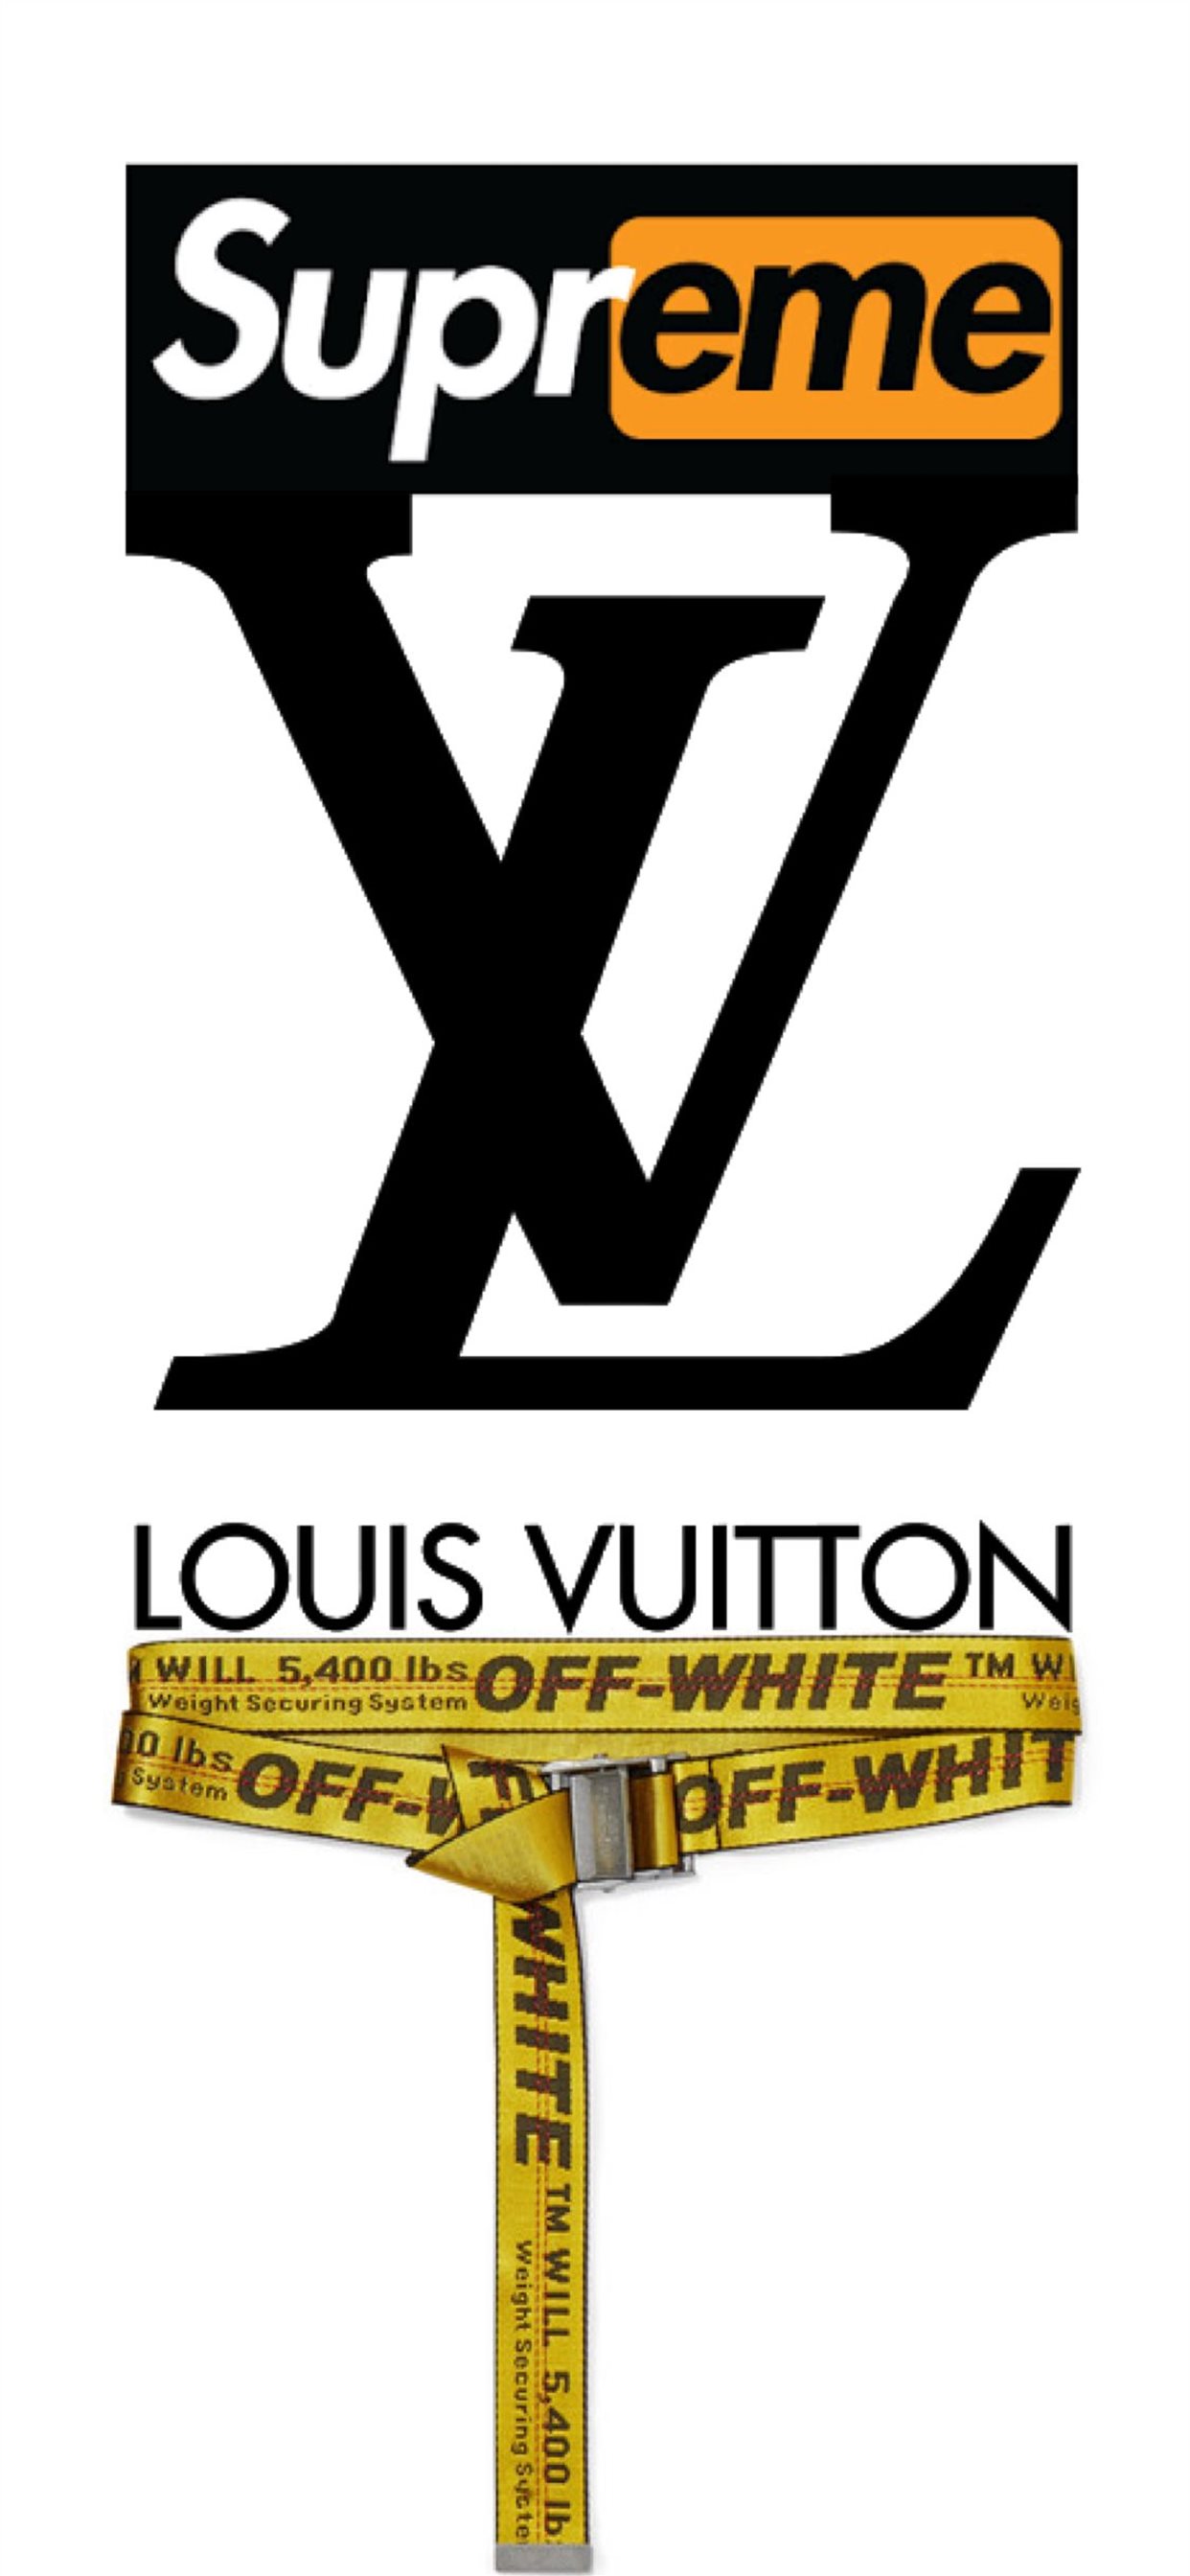 Louis Vuitton off white wallpaper iPhone Wallpapers Free Download